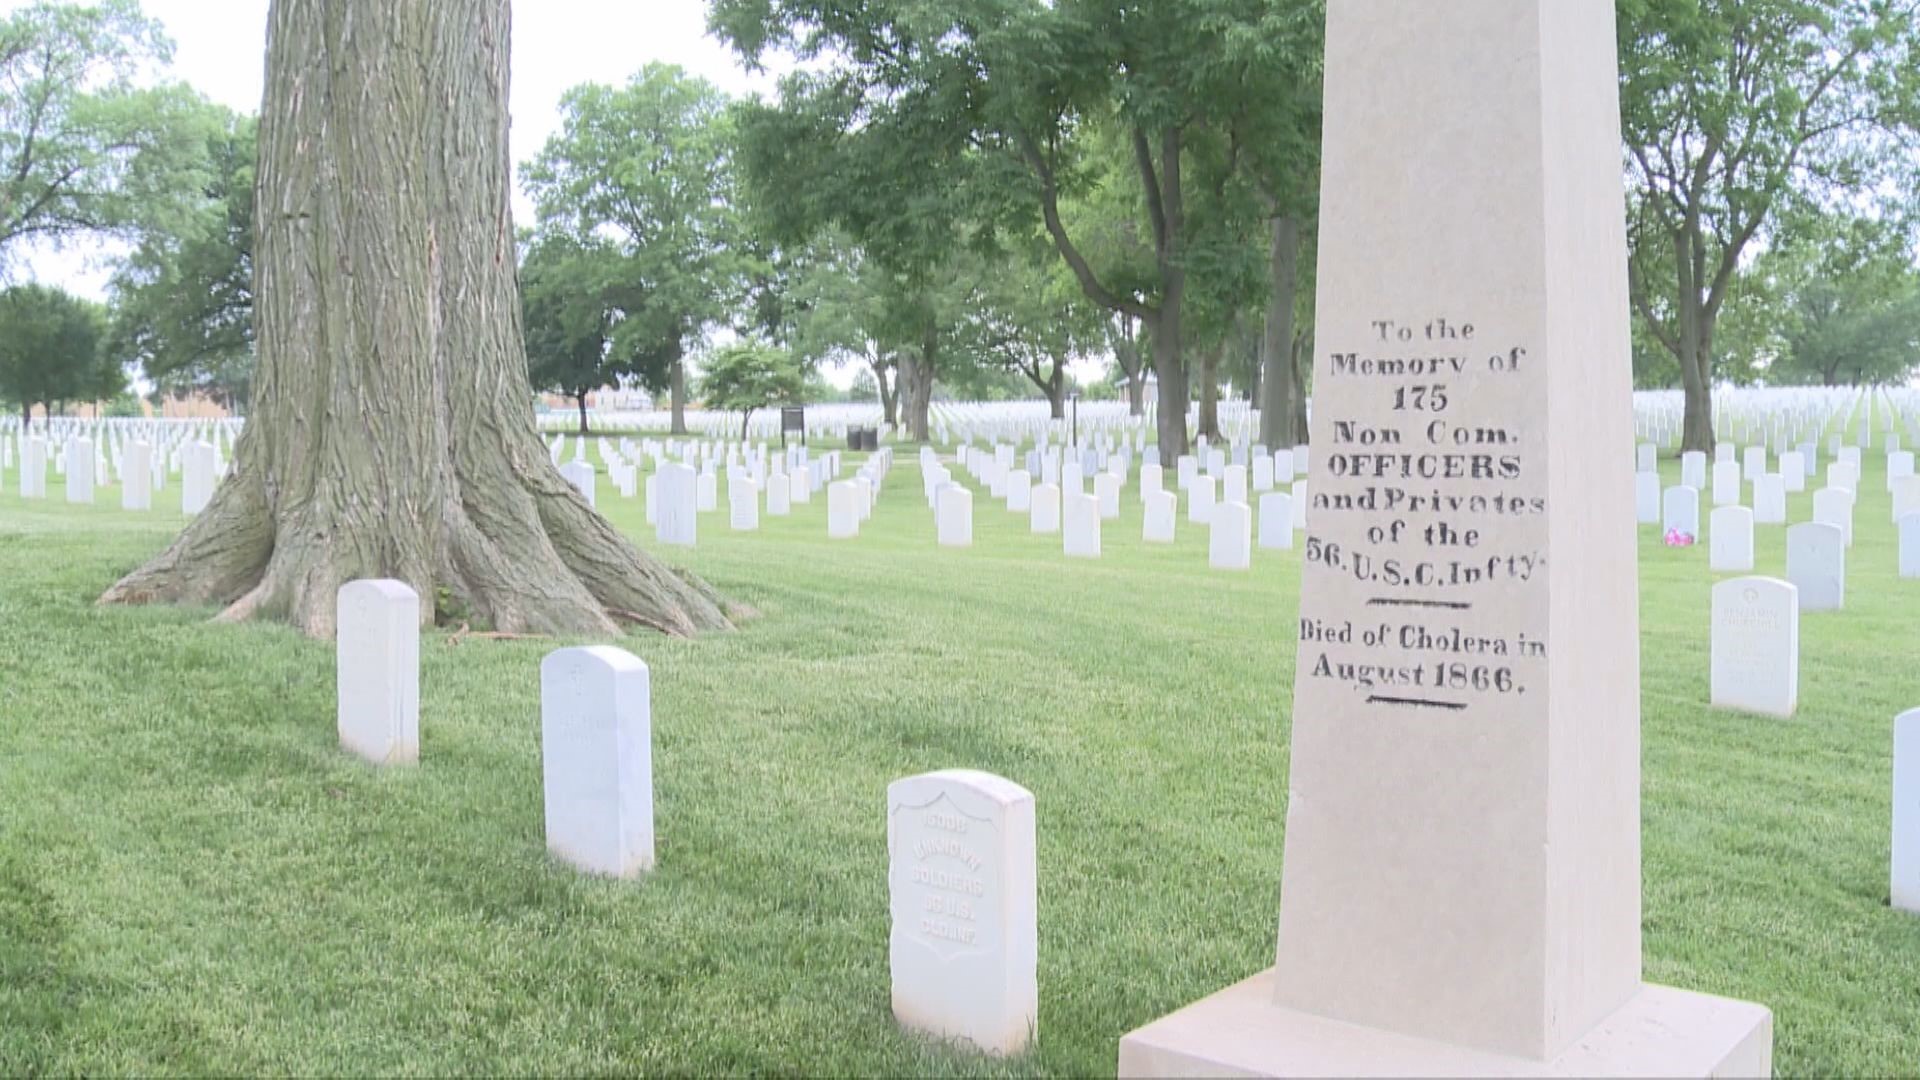 Jefferson Barracks honored 175 Black infantrymen who died in 1866. They were initially denied burial at the cemetery. The men served in the 56th U.S. Colored Troops.